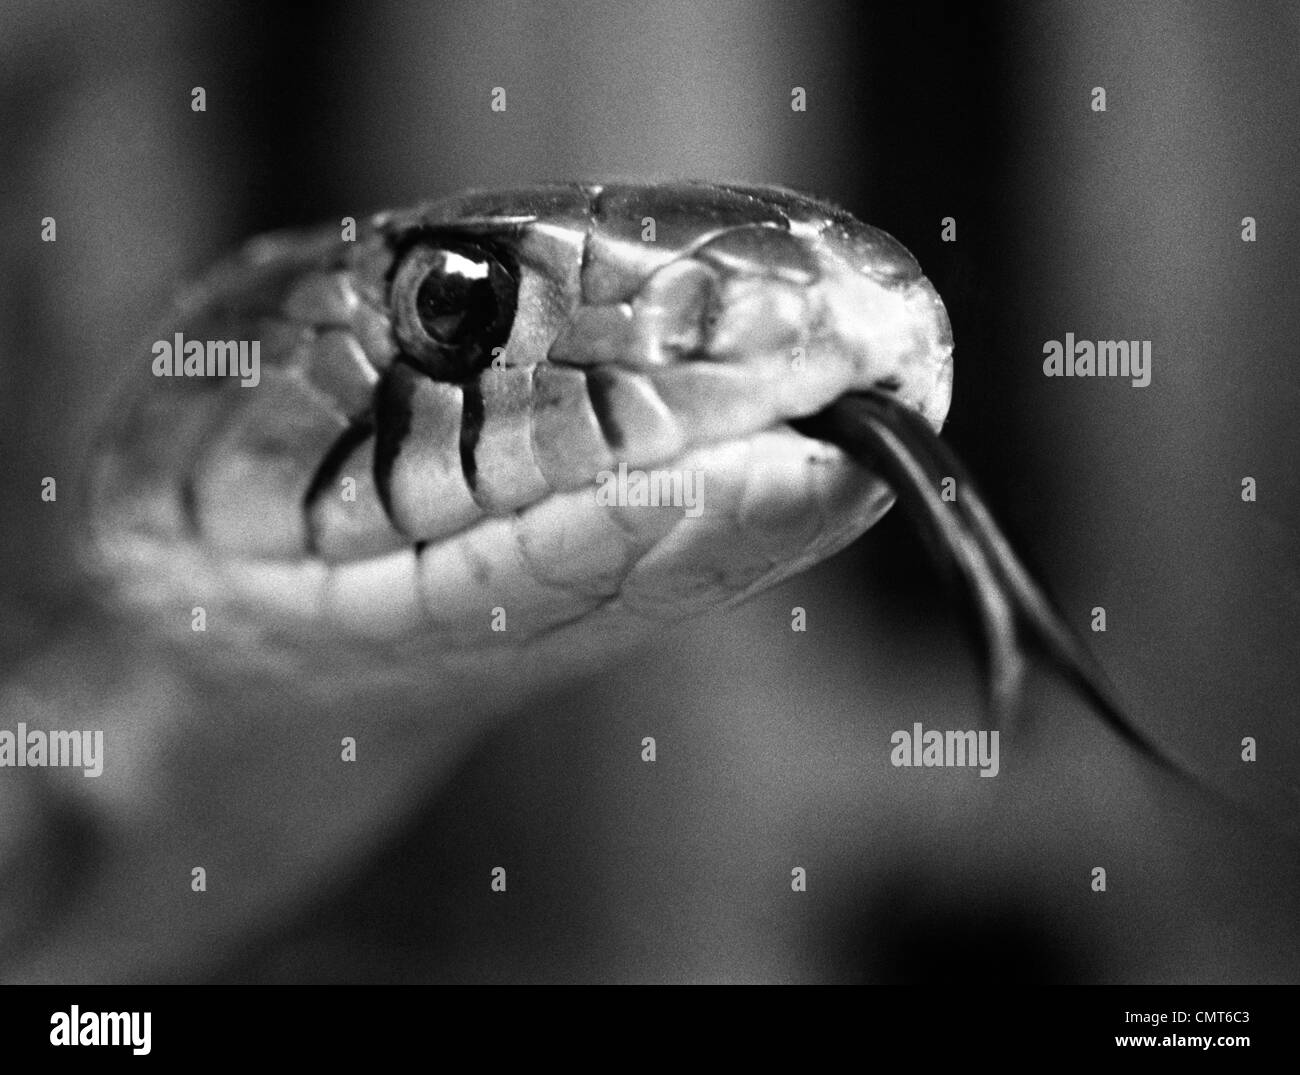 1960s CLOSE-UP HEAD OF SNAKE STICKING OUT TONGUE Stock Photo